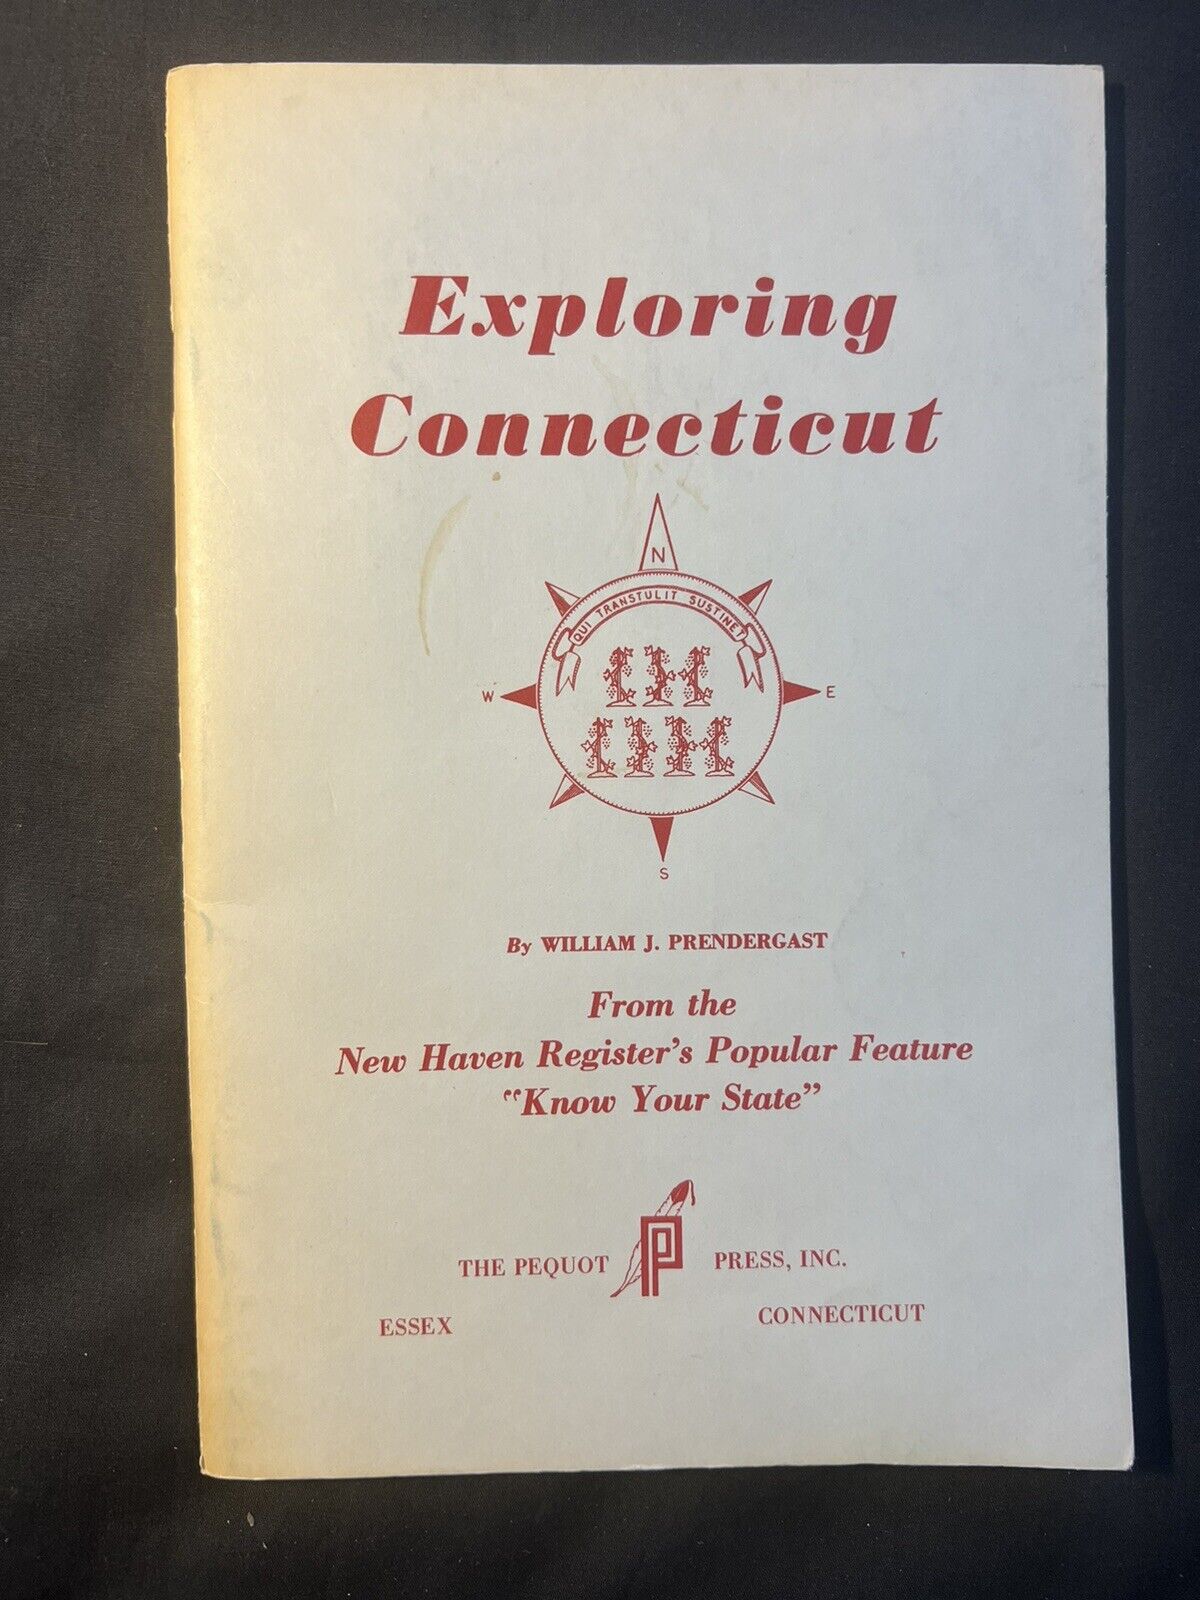 1970 Exploring Connecticut Stories History Frogs Windham Nutmeg State Trains